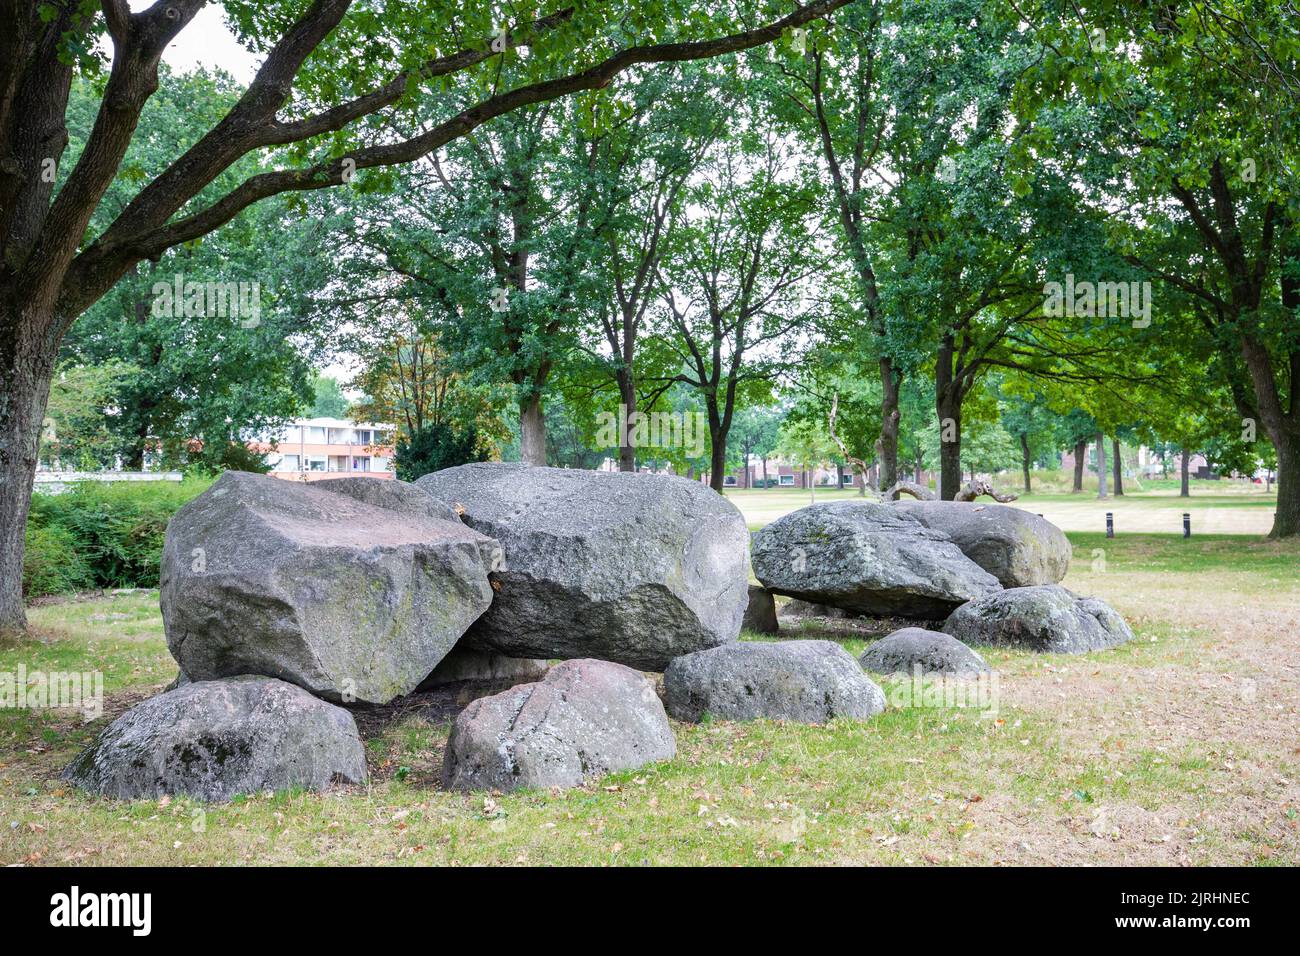 Dolmen D46, Haselackers municipality of Emmen in the Dutch province of Drenthe is a Neolithic Tomb and protected historical monument in an urban envir Stock Photo